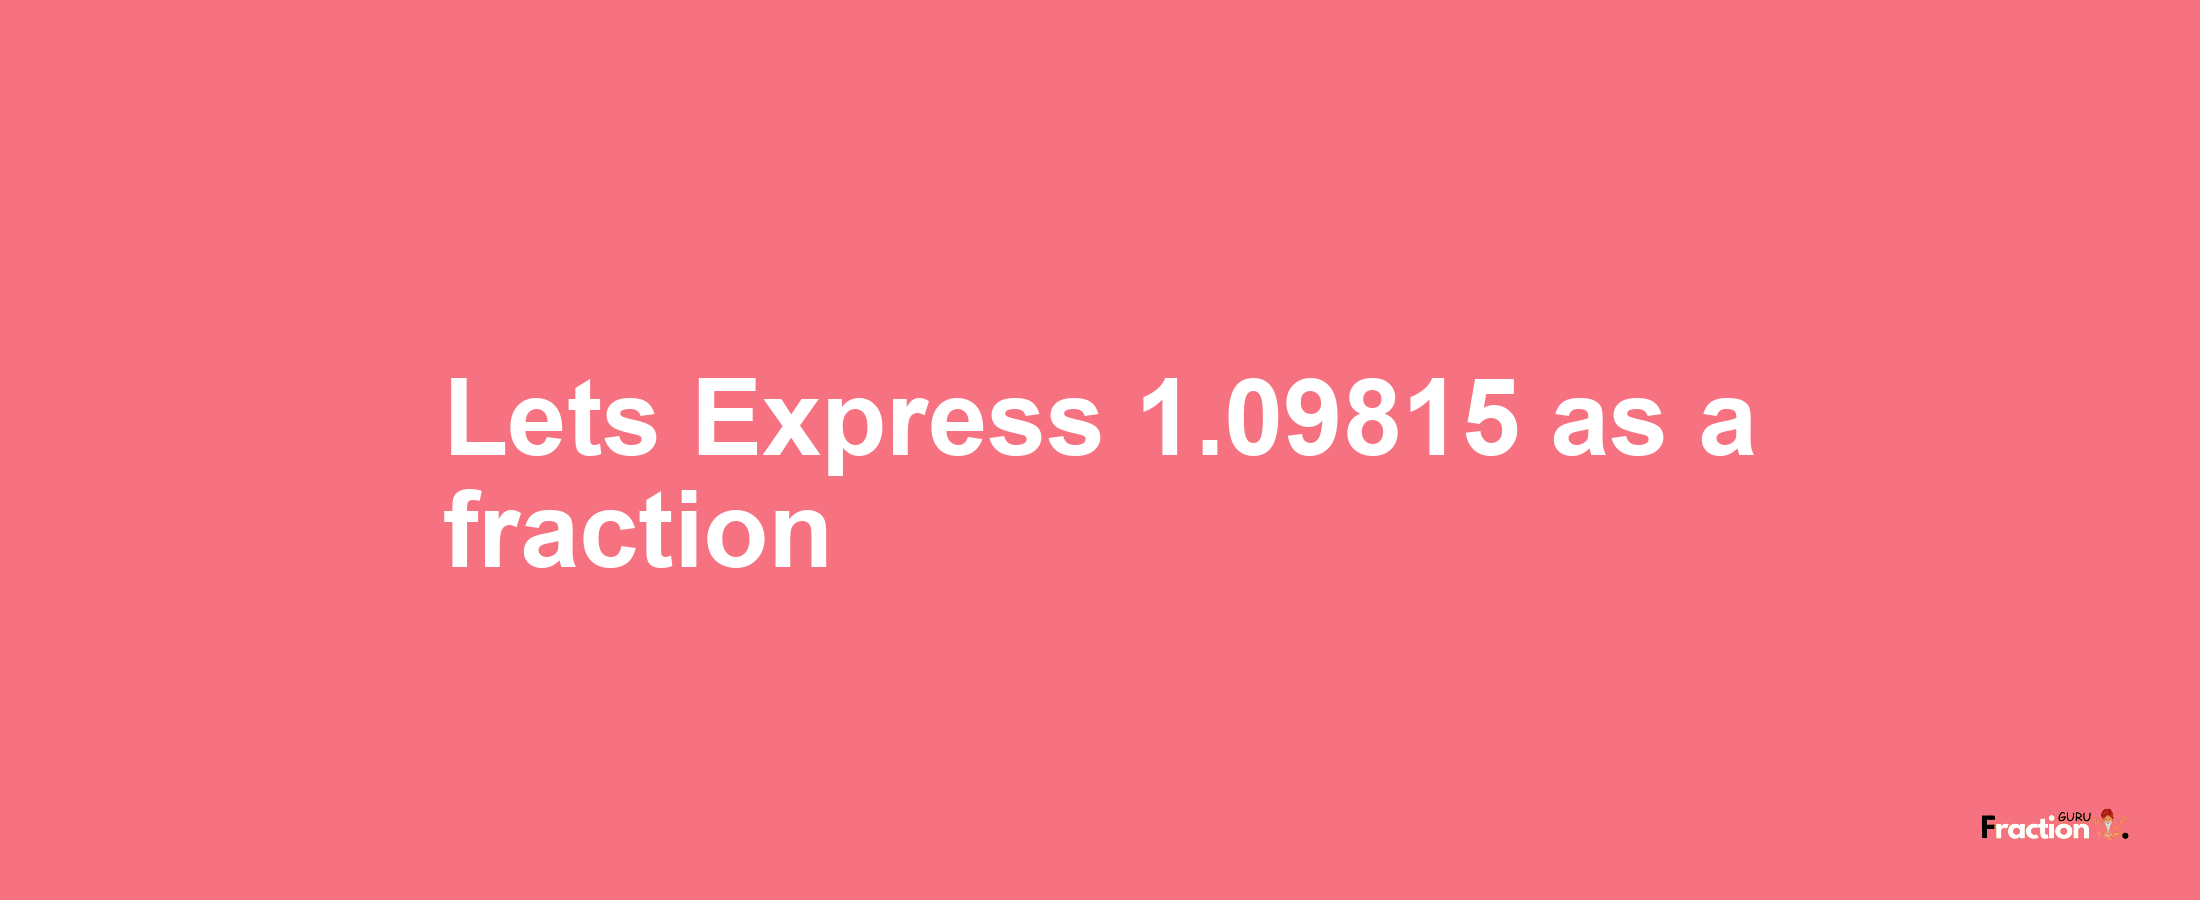 Lets Express 1.09815 as afraction